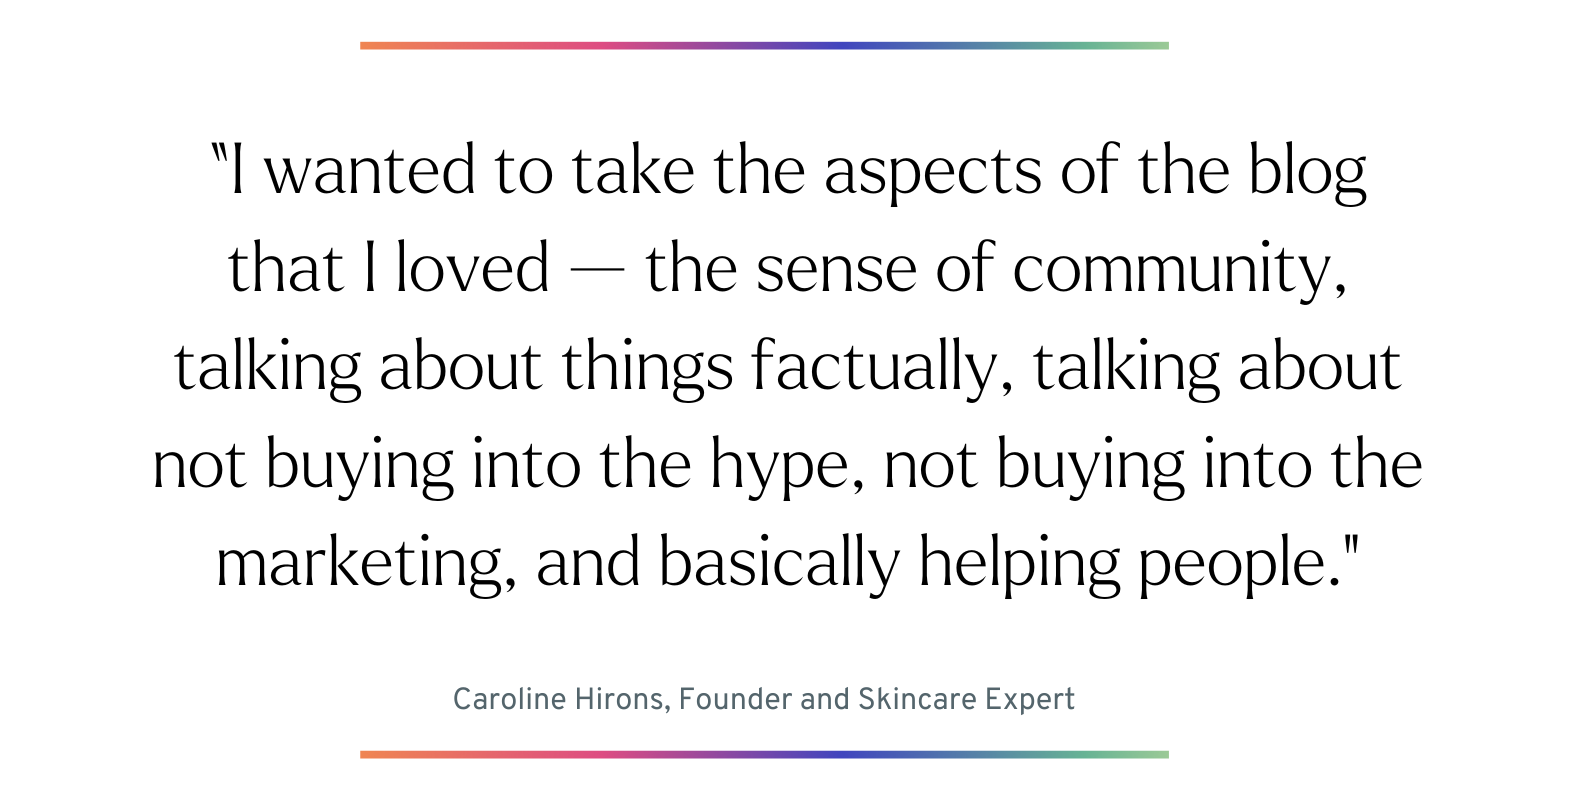 Quote: “I wanted to take the aspects of the blog that I loved — the sense of community, talking about things factually, talking about not buying into the hype, not buying into the marketing, and basically helping people." - Caroline Hirons, Founder and Skincare Expert